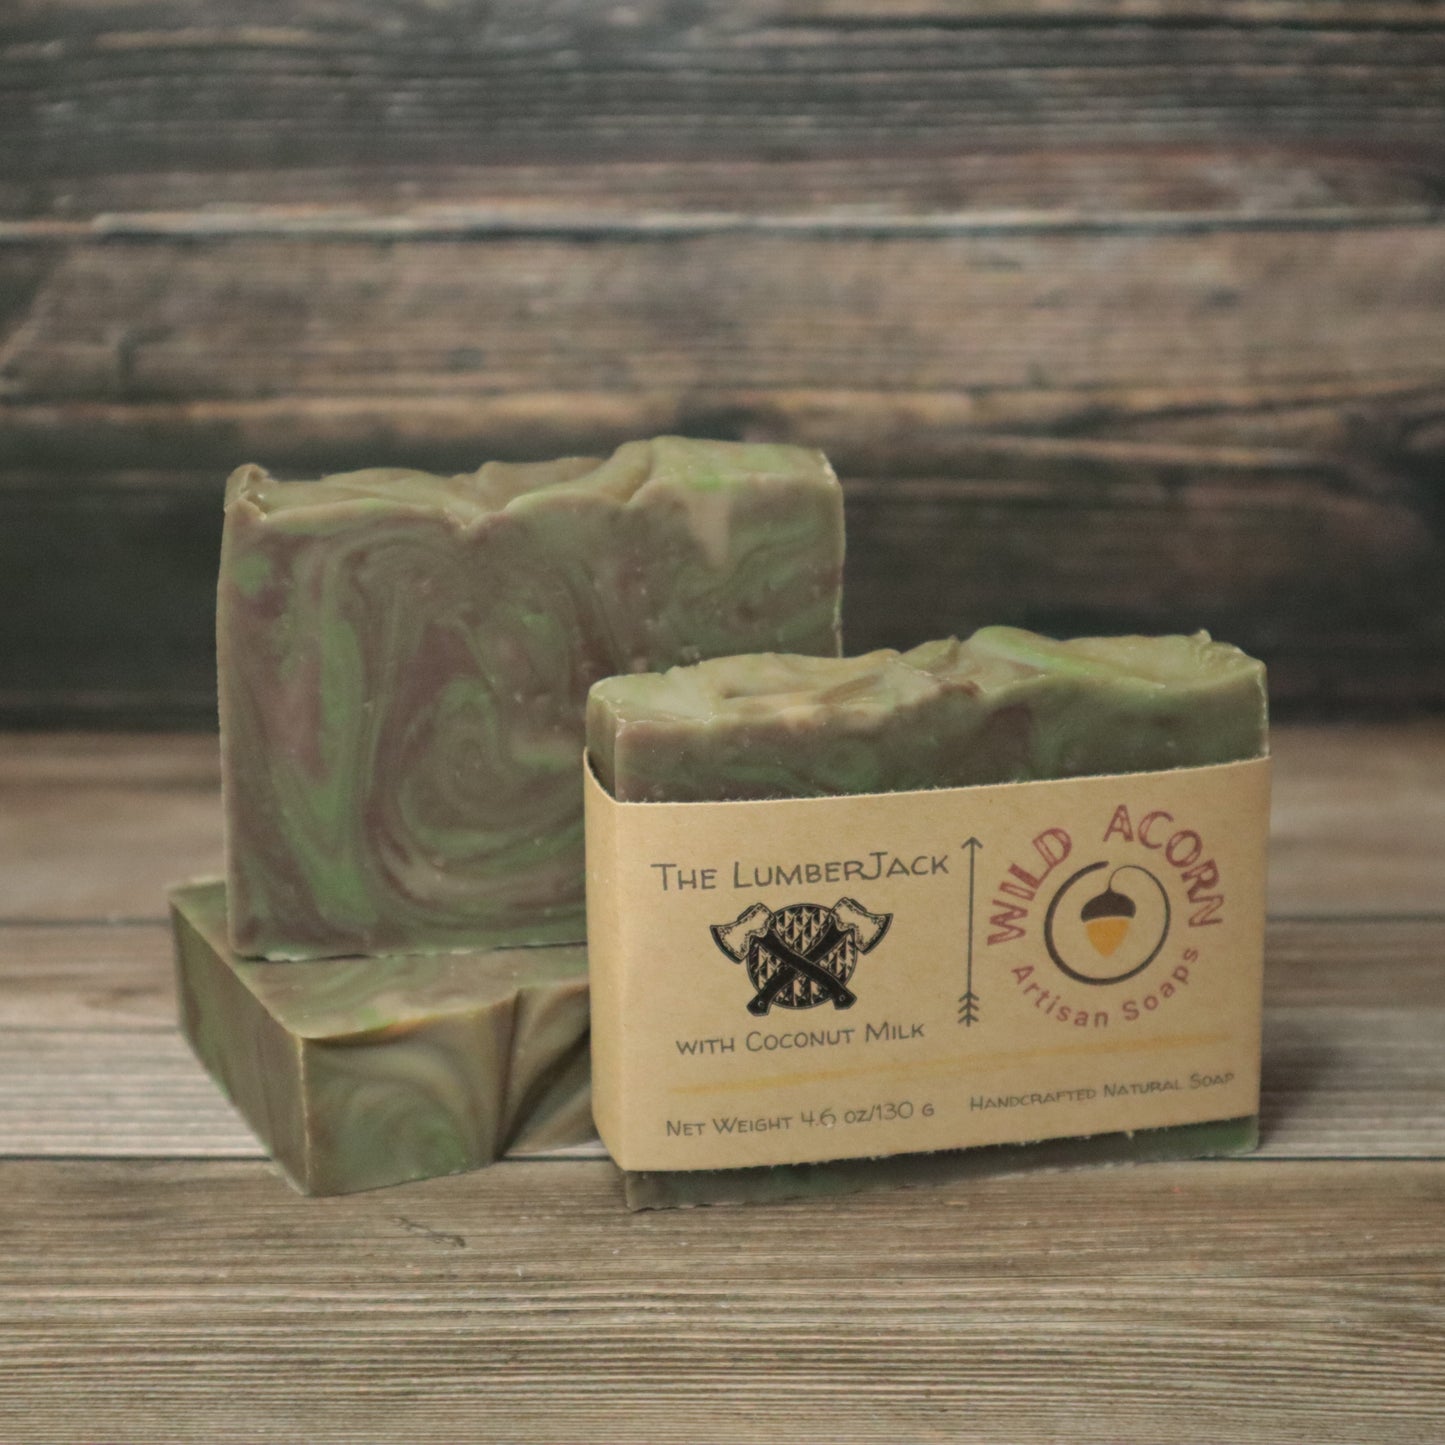 The LumberJack Soap with Coconut Milk